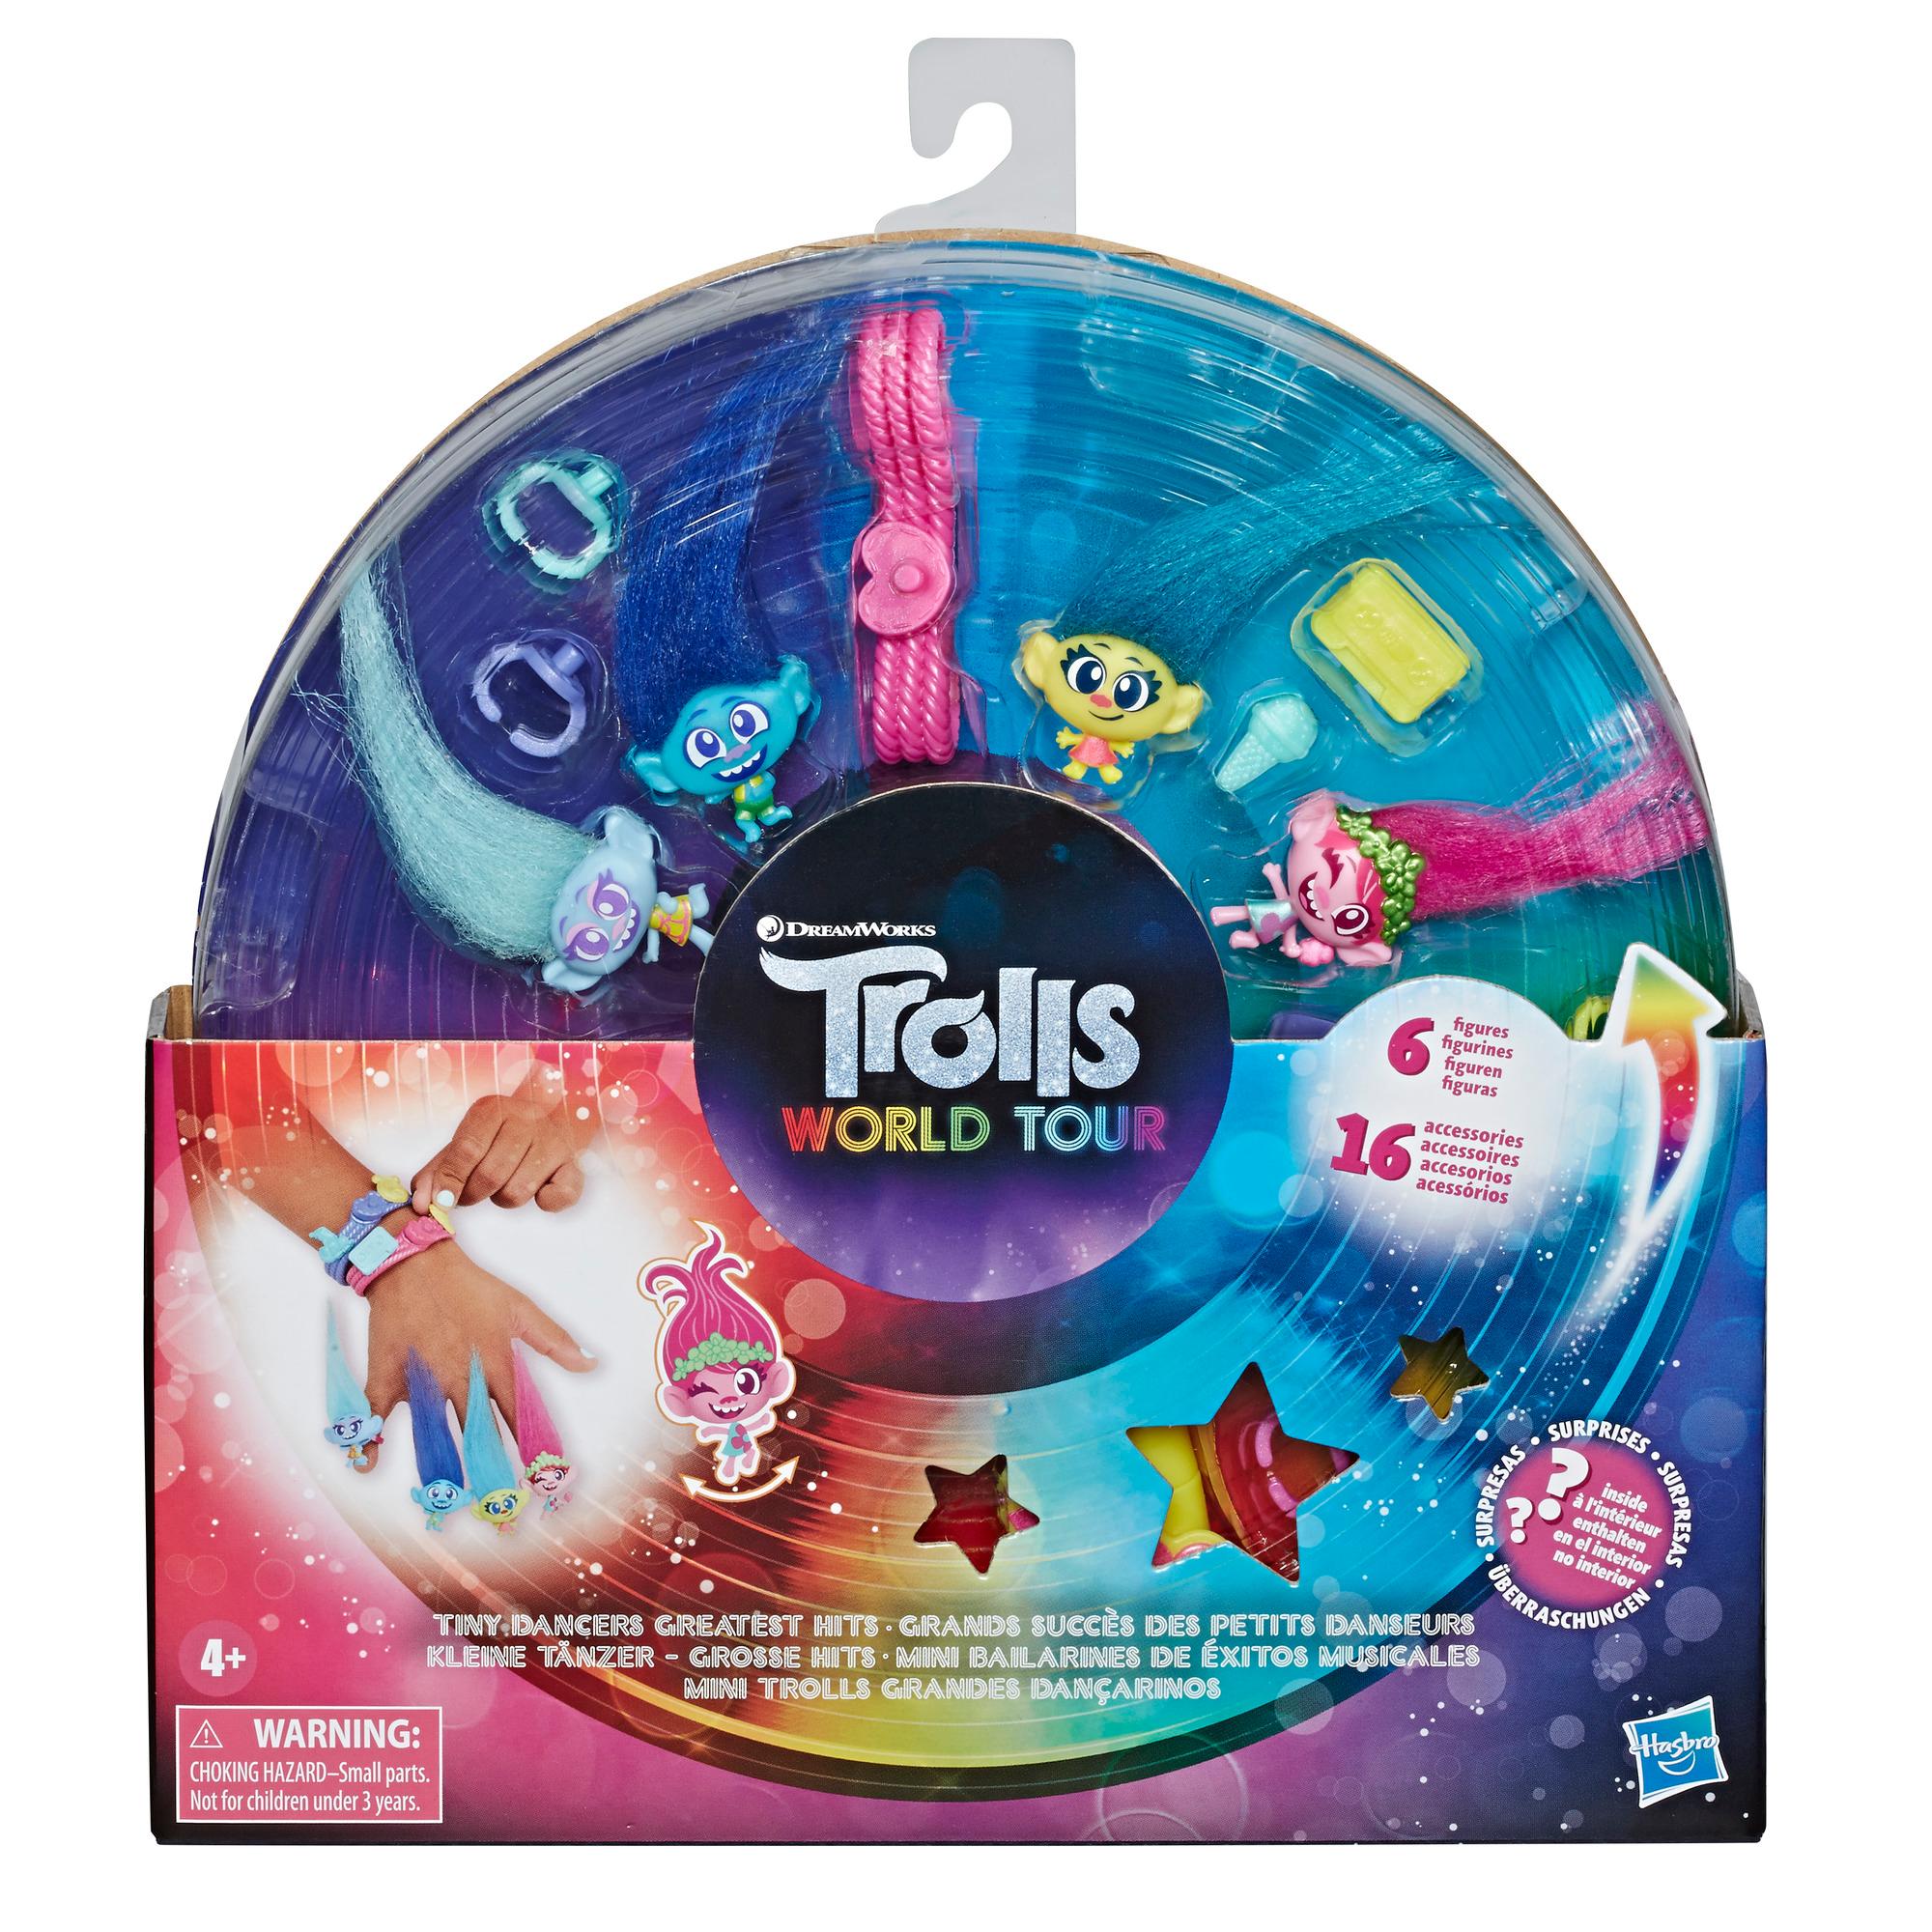 DreamWorks Trolls Tiny Dancers Greatest Hits, Toy with 6 Collector Figures, Necklace, 2 Bracelets, and More